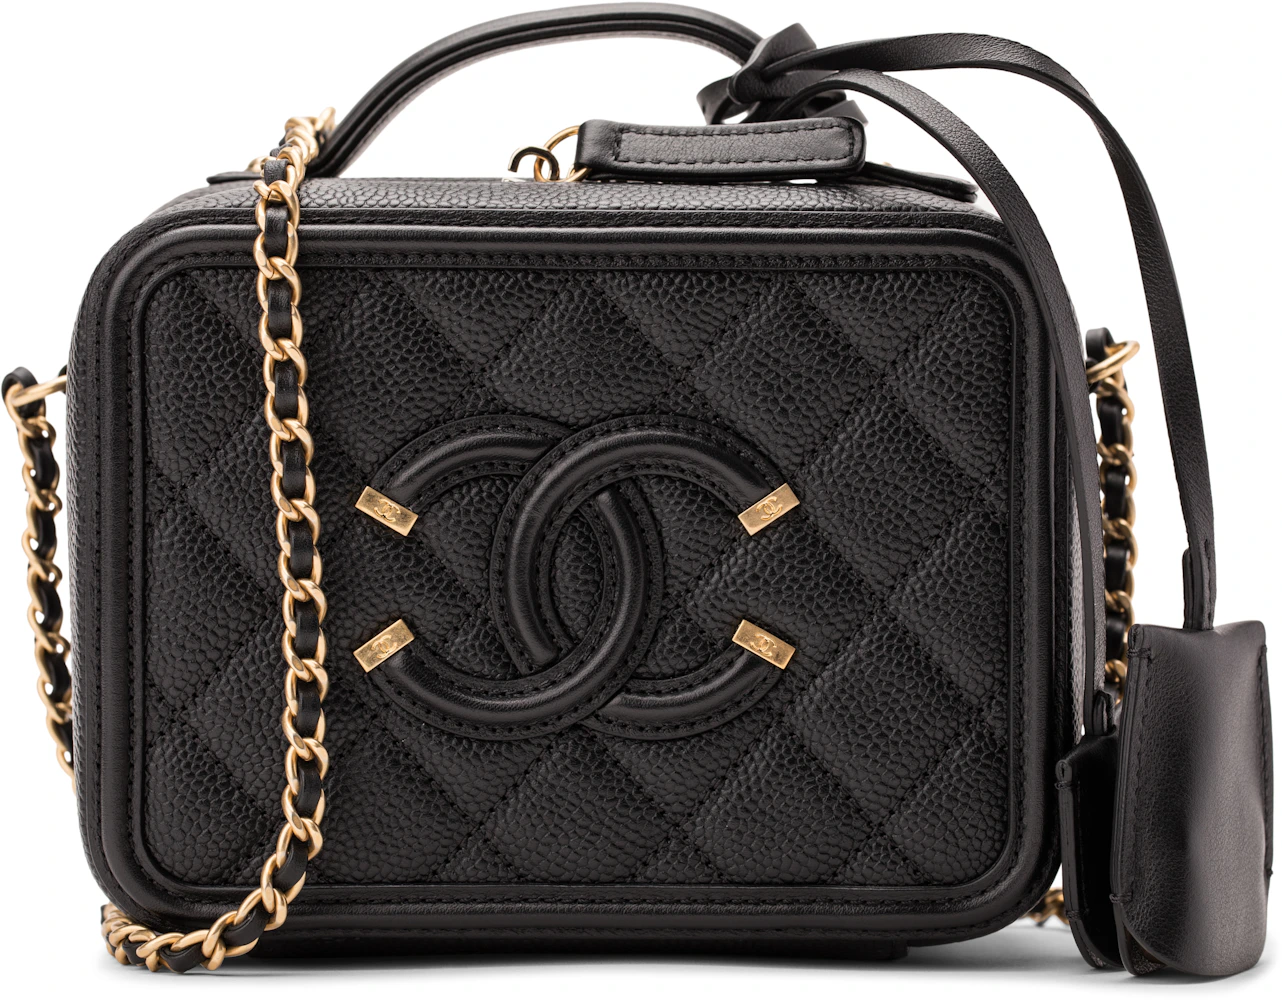 Chanel Quilted Small CC Filigree Vanity Case Beige Black Caviar